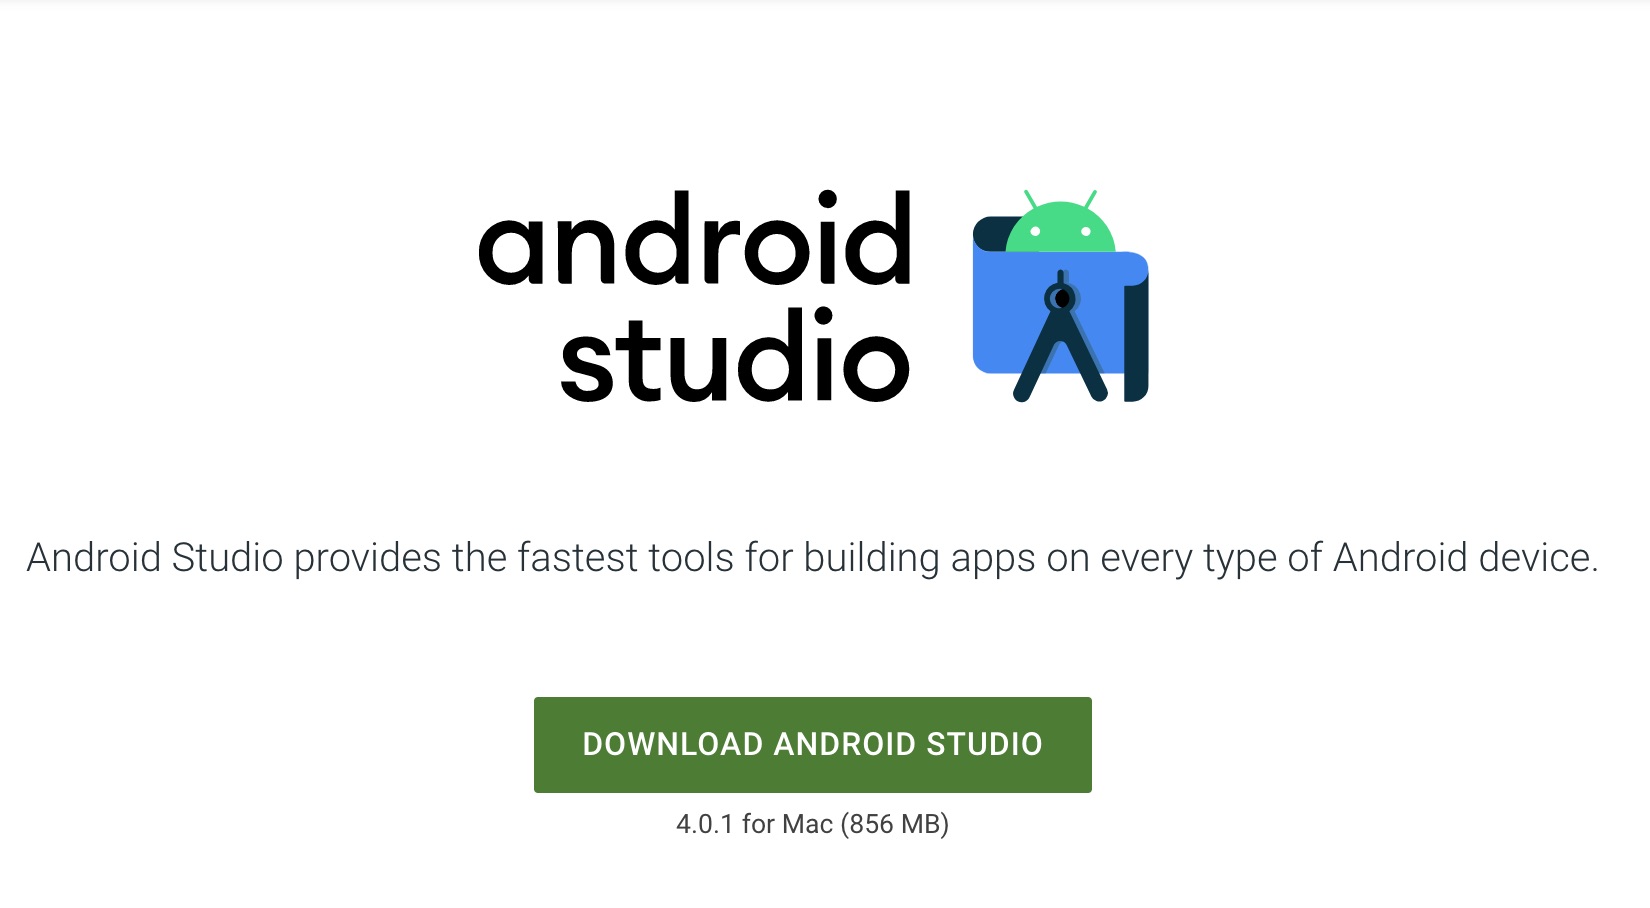 Android Studio’s Android Emulator